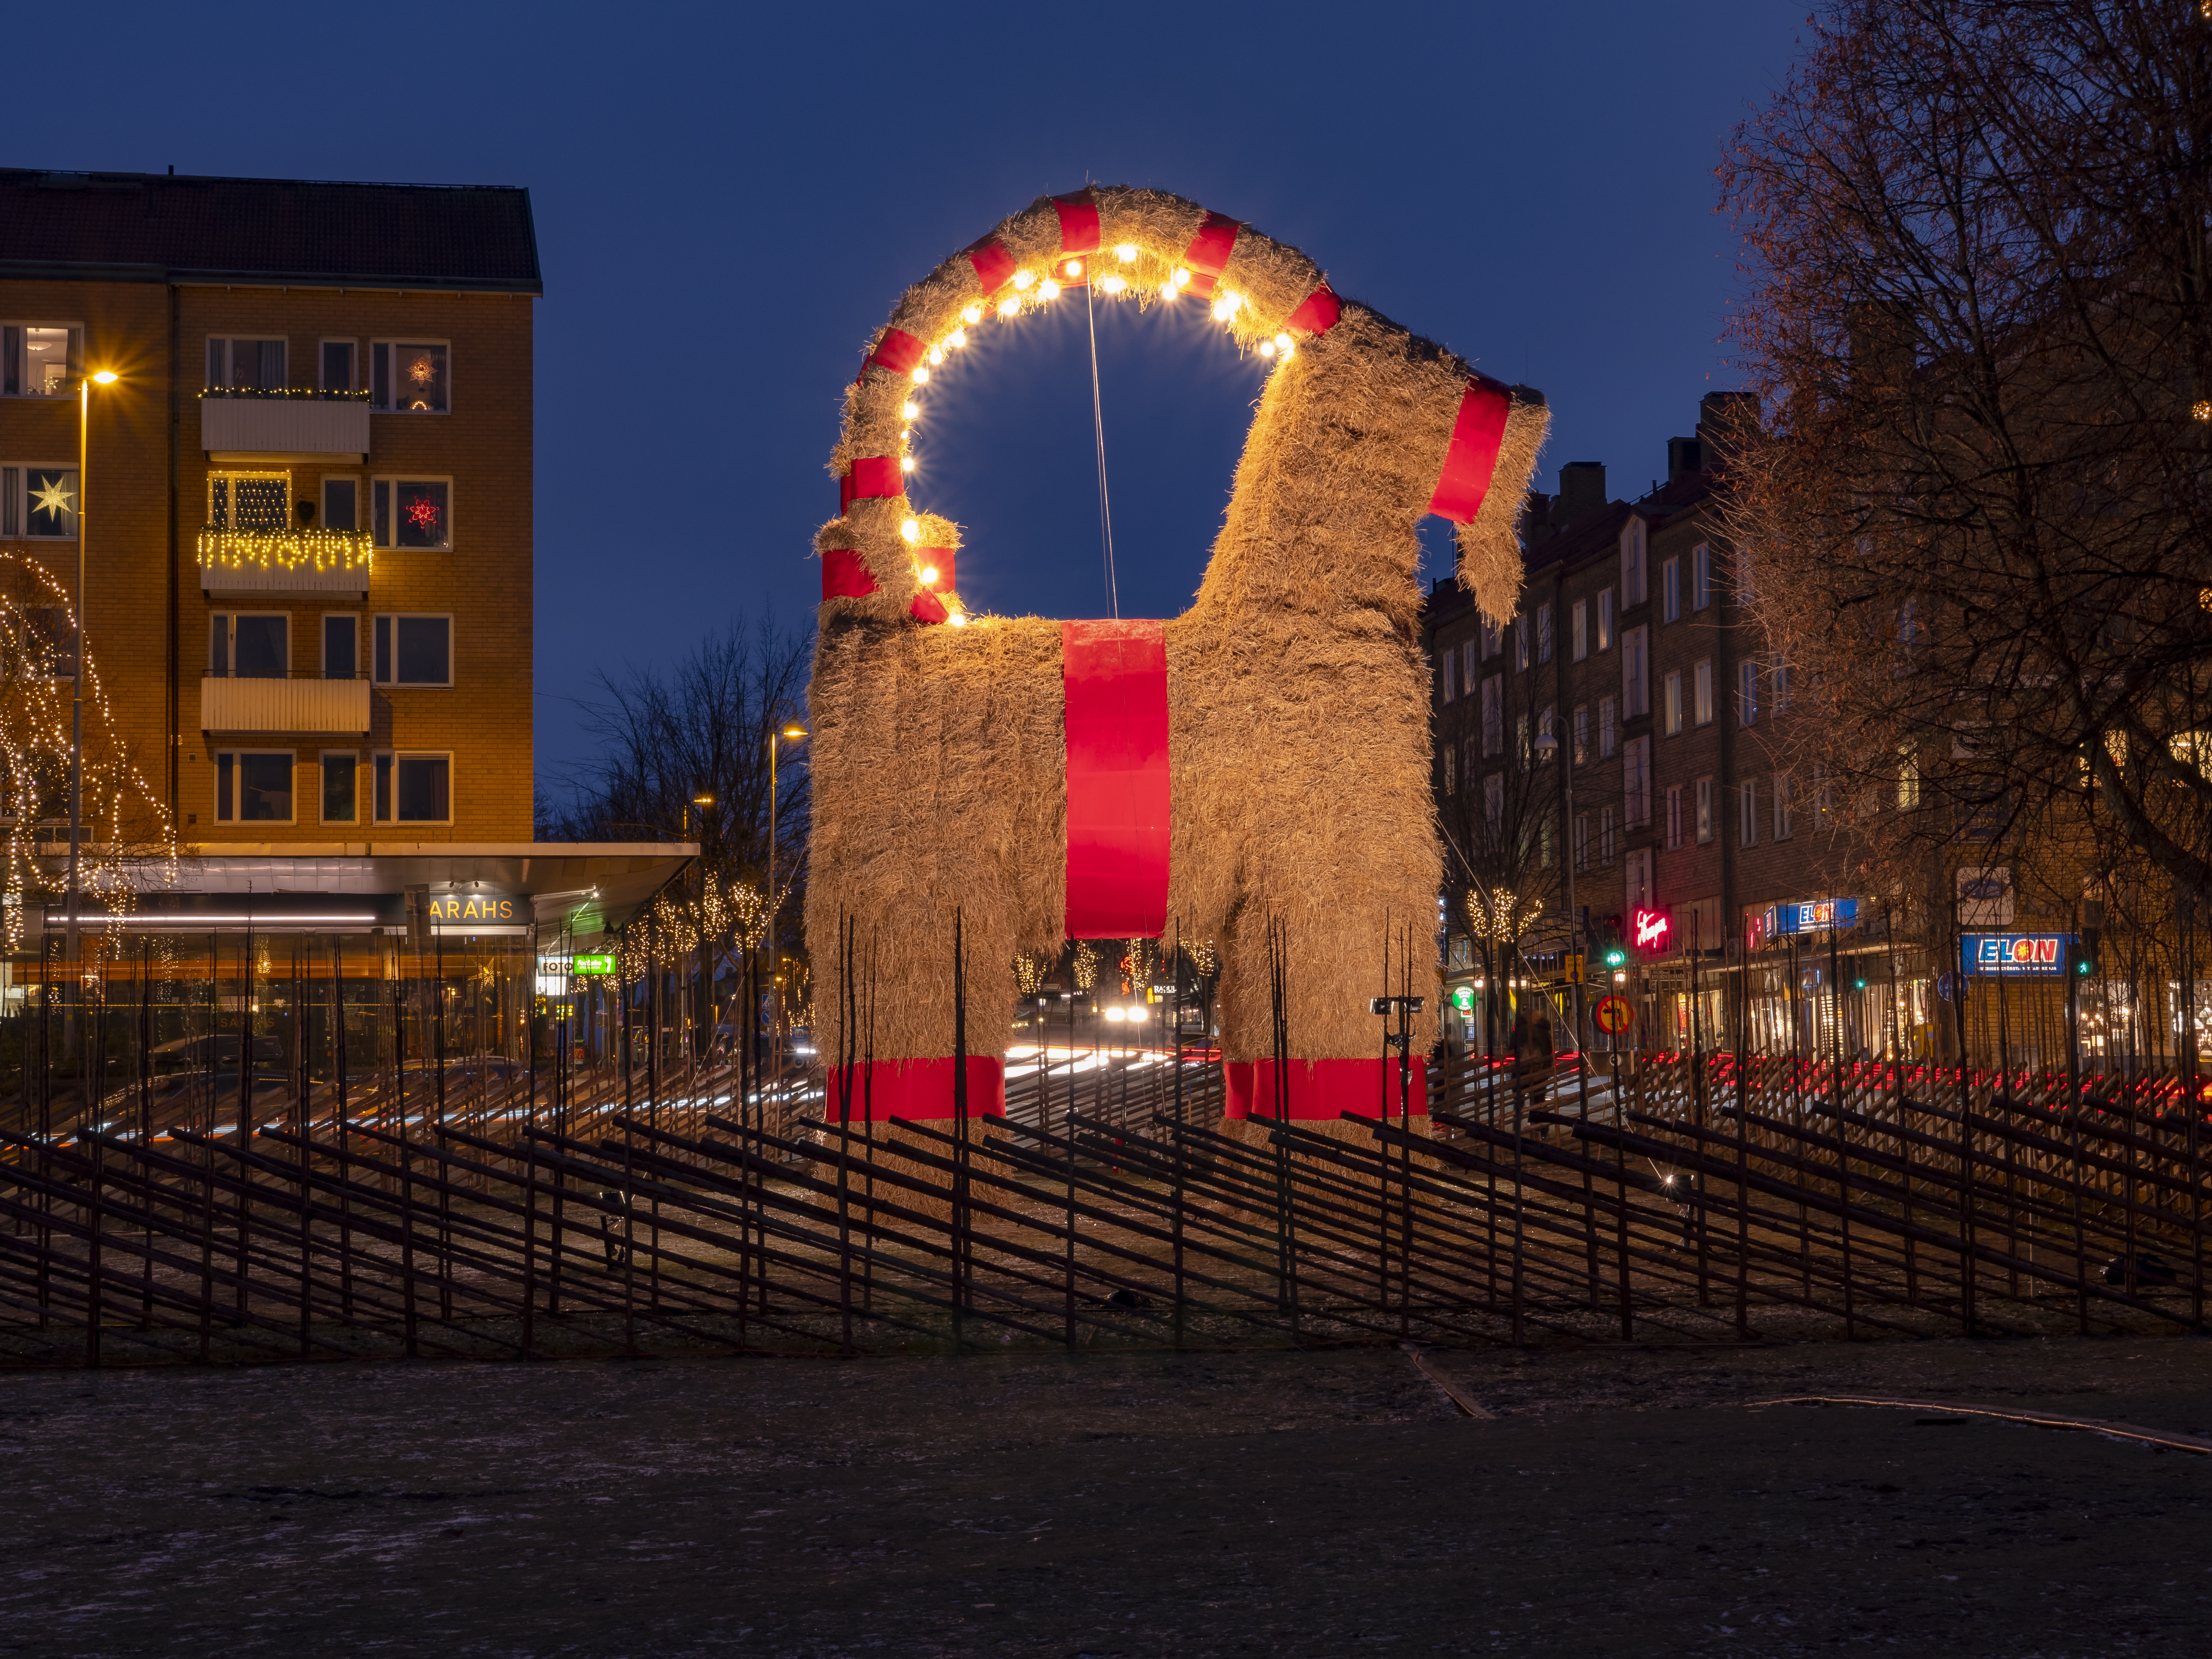 Amazing Christmas Traditions Around the World to Experience During Your Family Vacation - Yule Goat in Sweden - Gavle Goat in Sweden